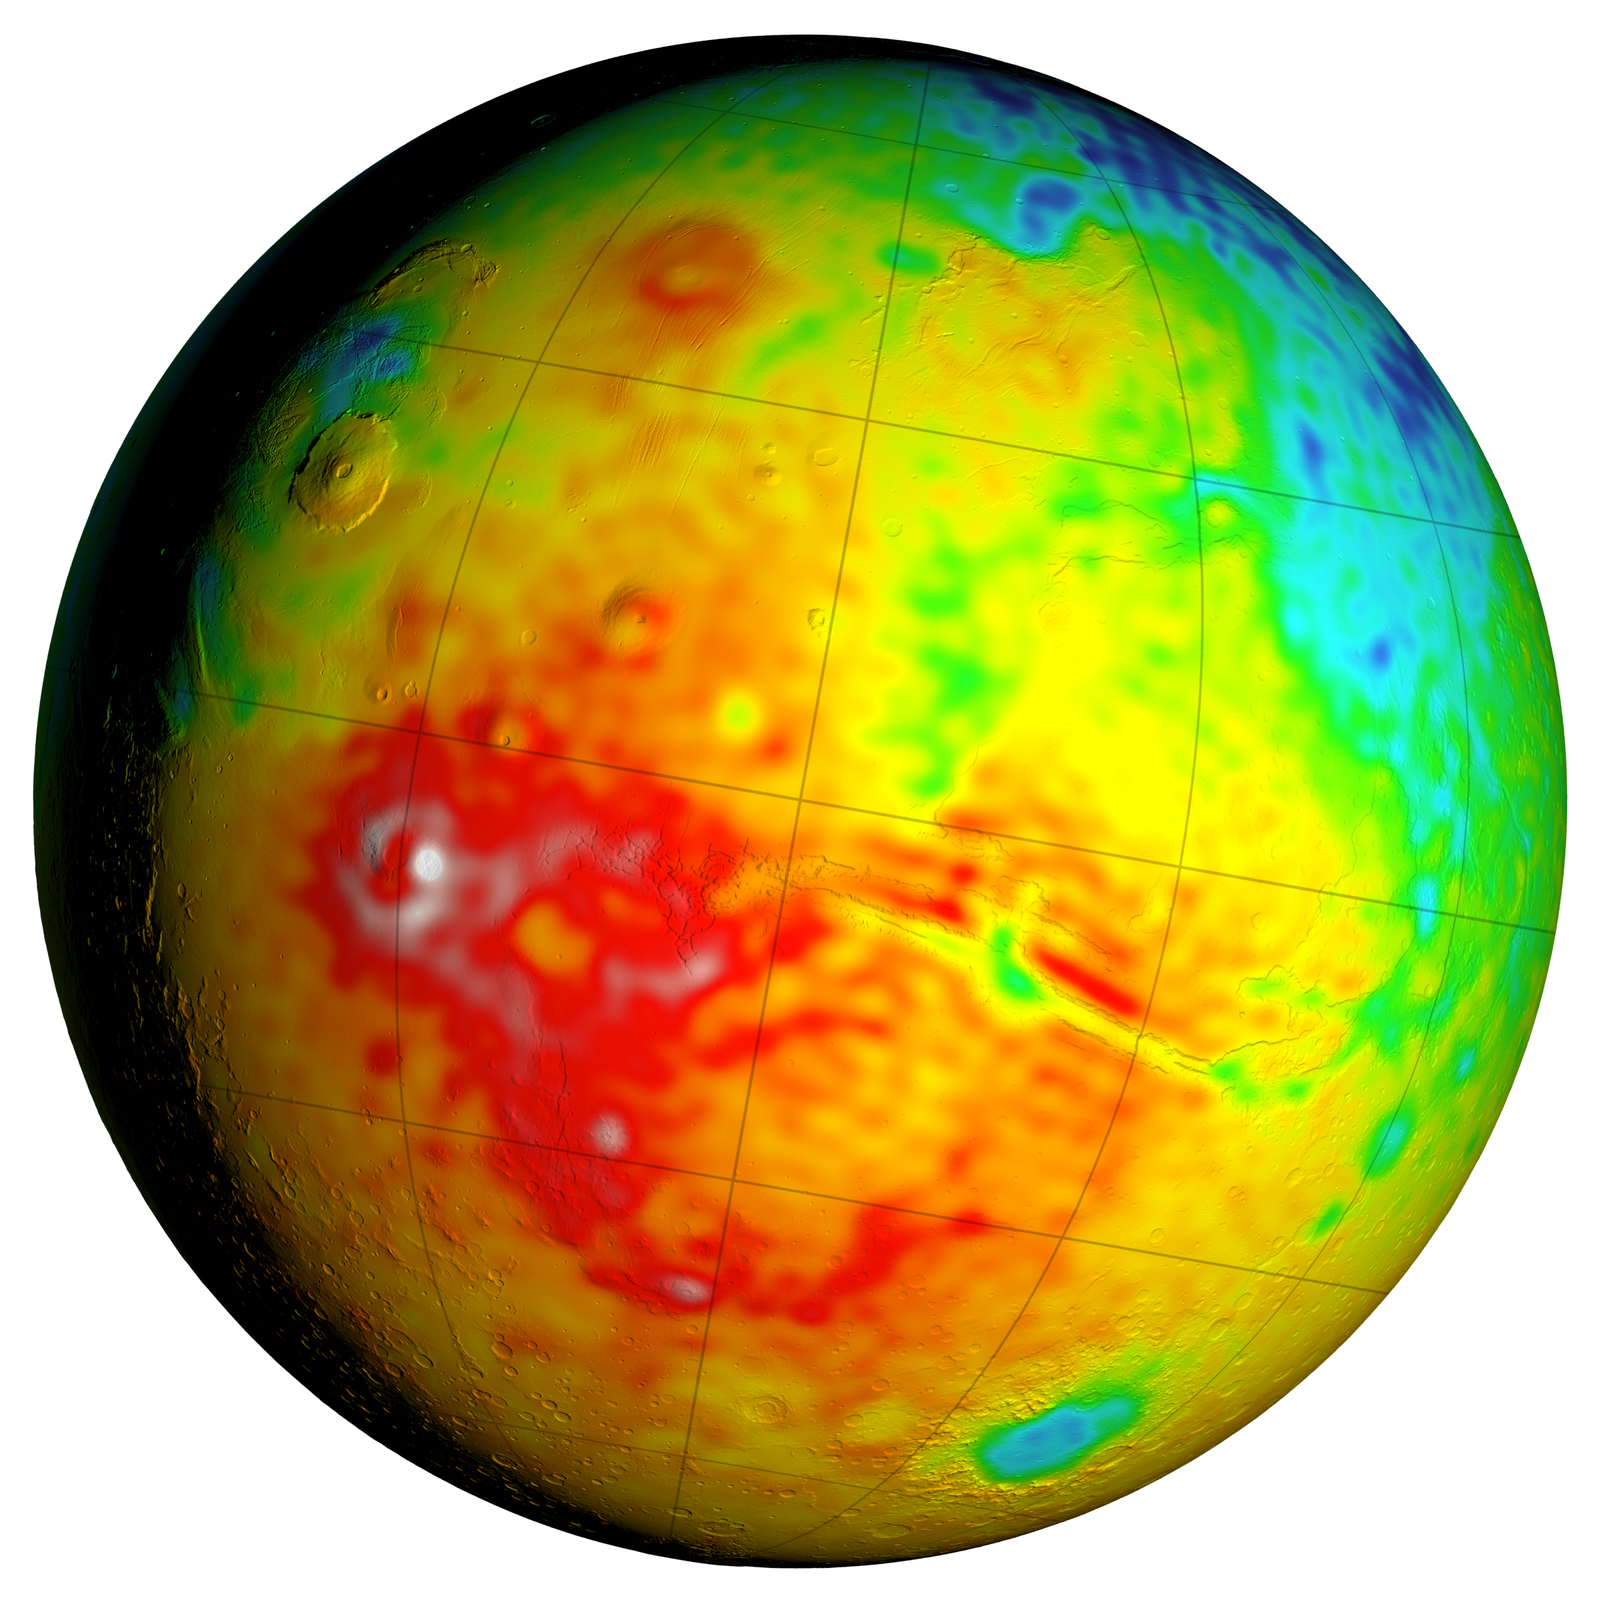 This Mars map shows variations in thickness of the planet's crust, the relatively thin surface layer overlying the mantle of the planet. It shows unprecedented detail derived from new mapping of variations in Mars' gravitational pull on orbiters.